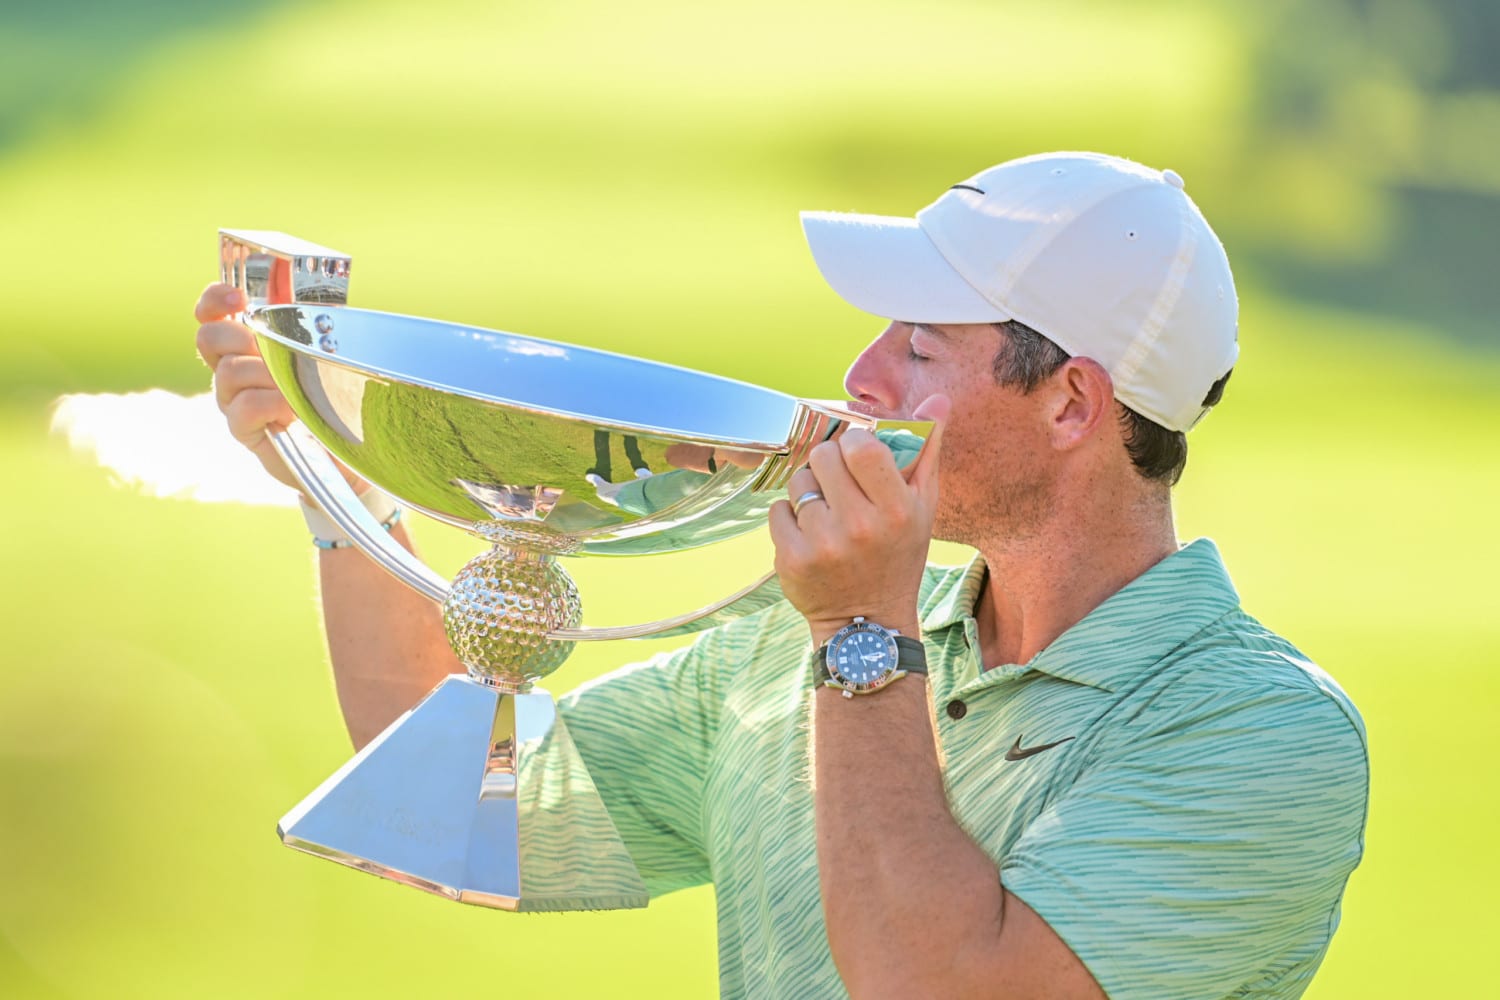 Rory McIlroy Claims Record 18M Prize for FedEx Cup